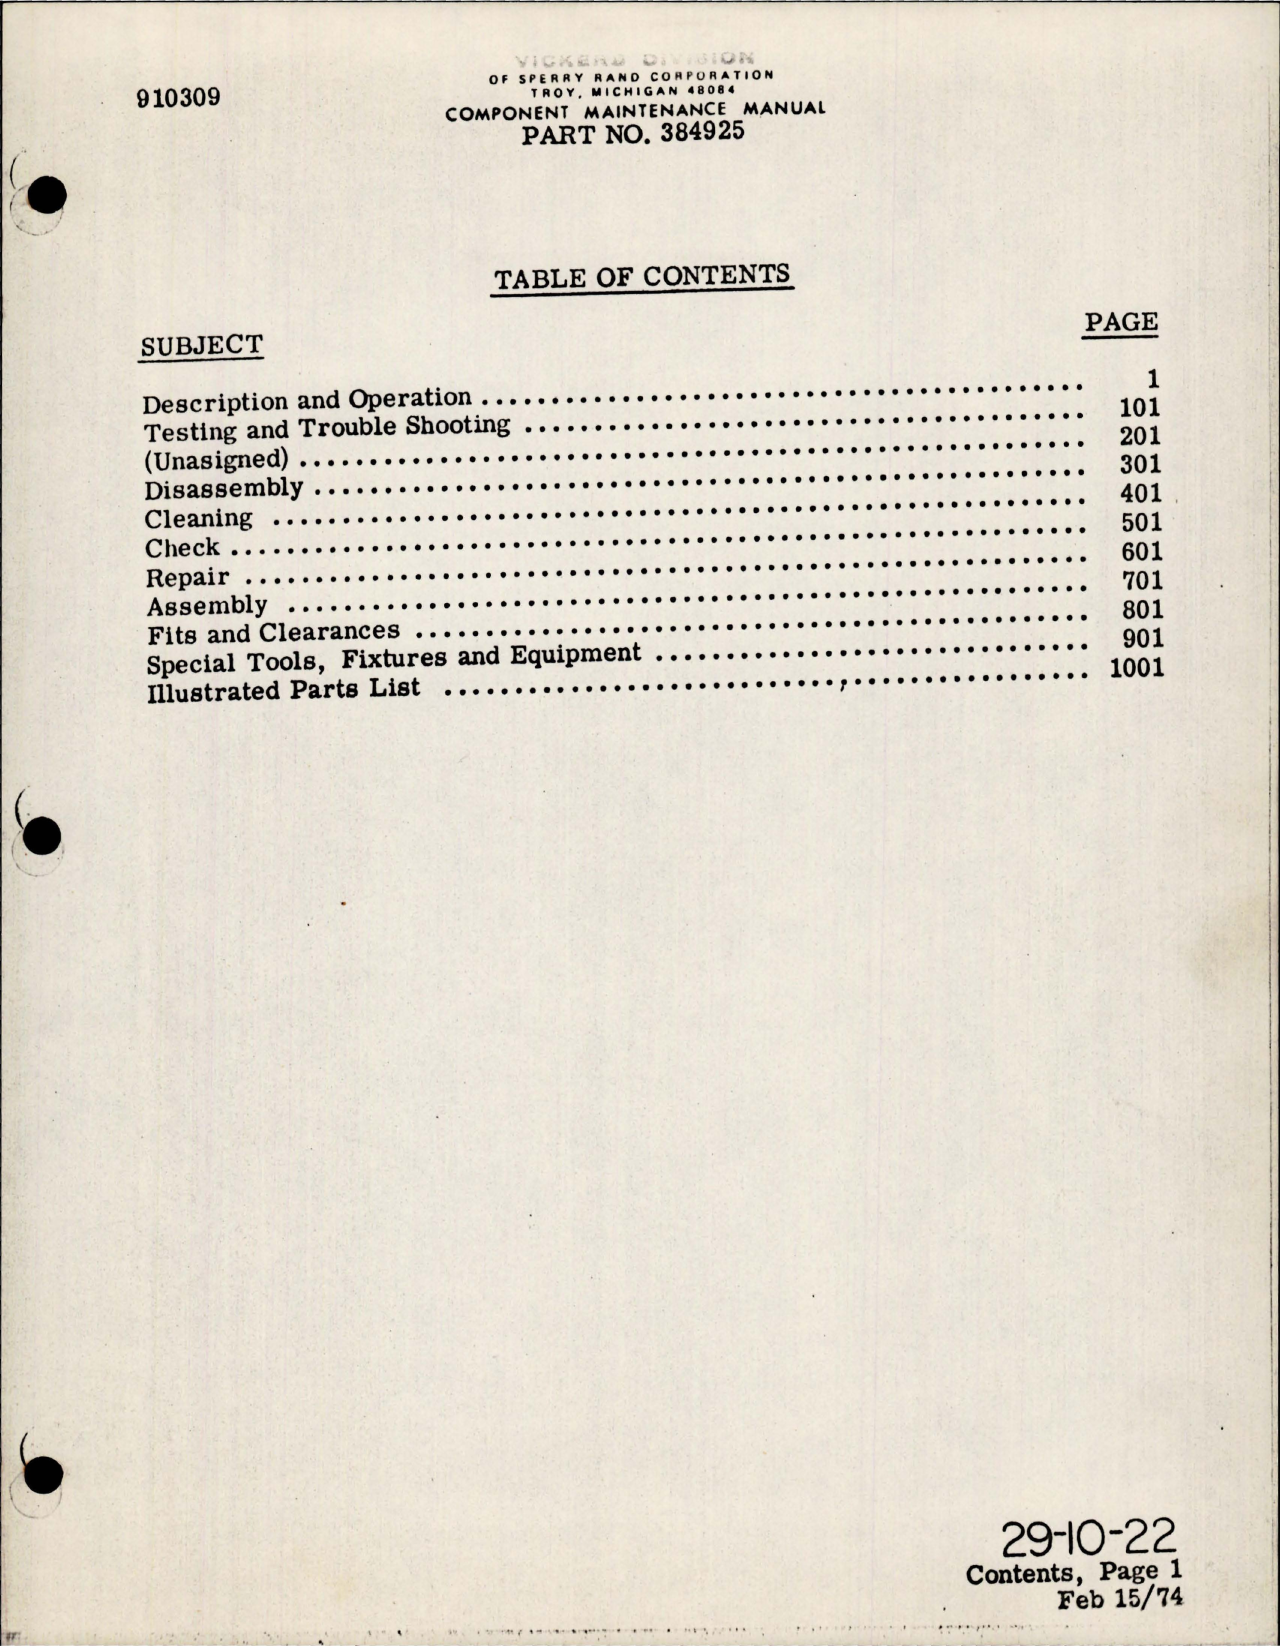 Sample page 5 from AirCorps Library document: Component Maintenance Manual for Hydraulic Pump - Part 384925 - Model PV3-044-26